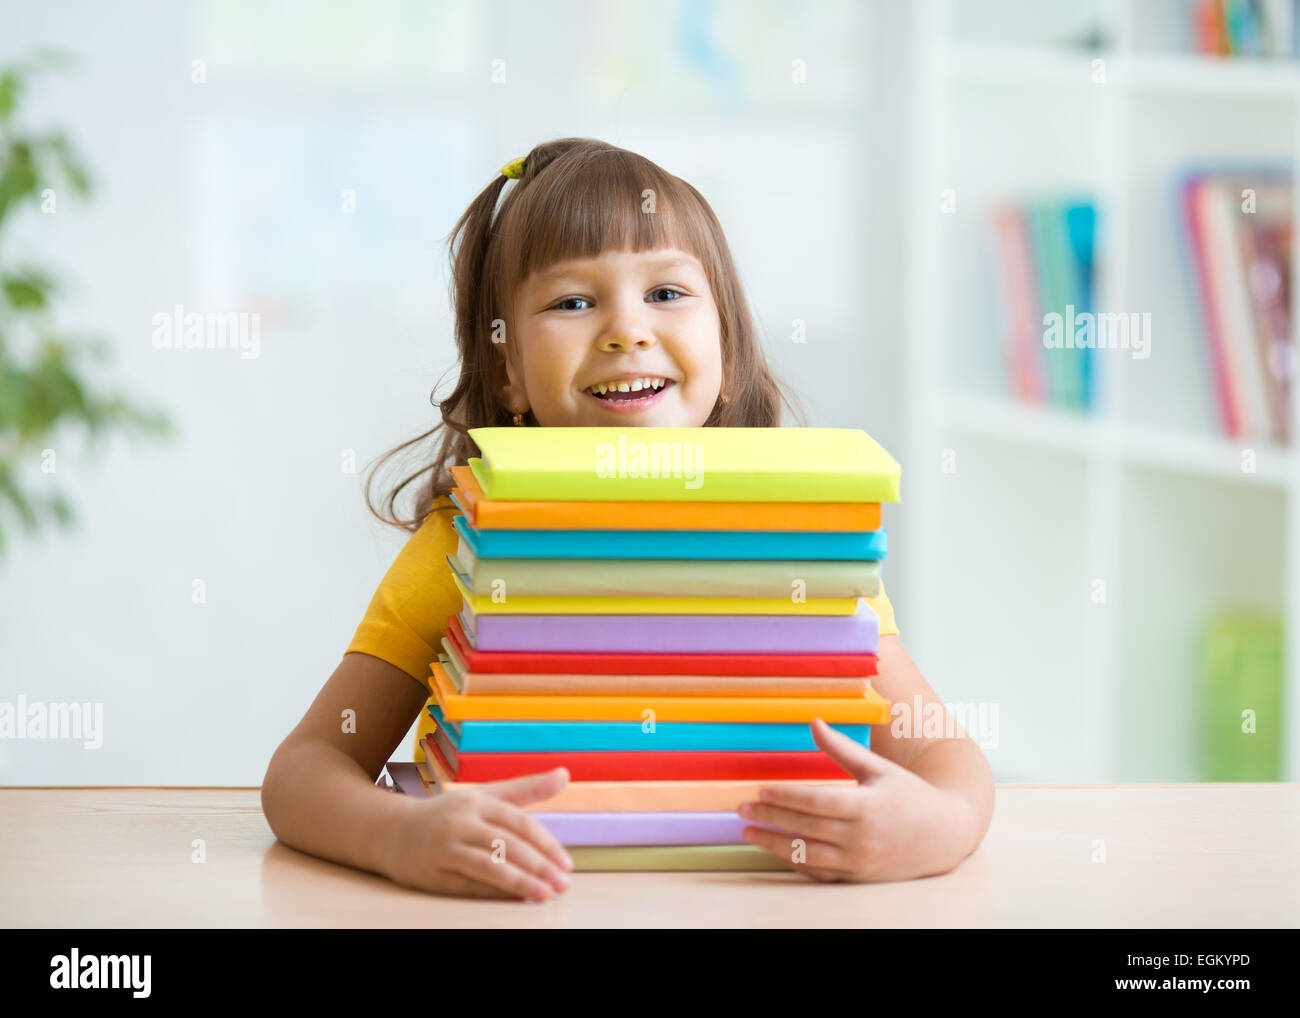 Happy little girl with a stack of books Stock Photo